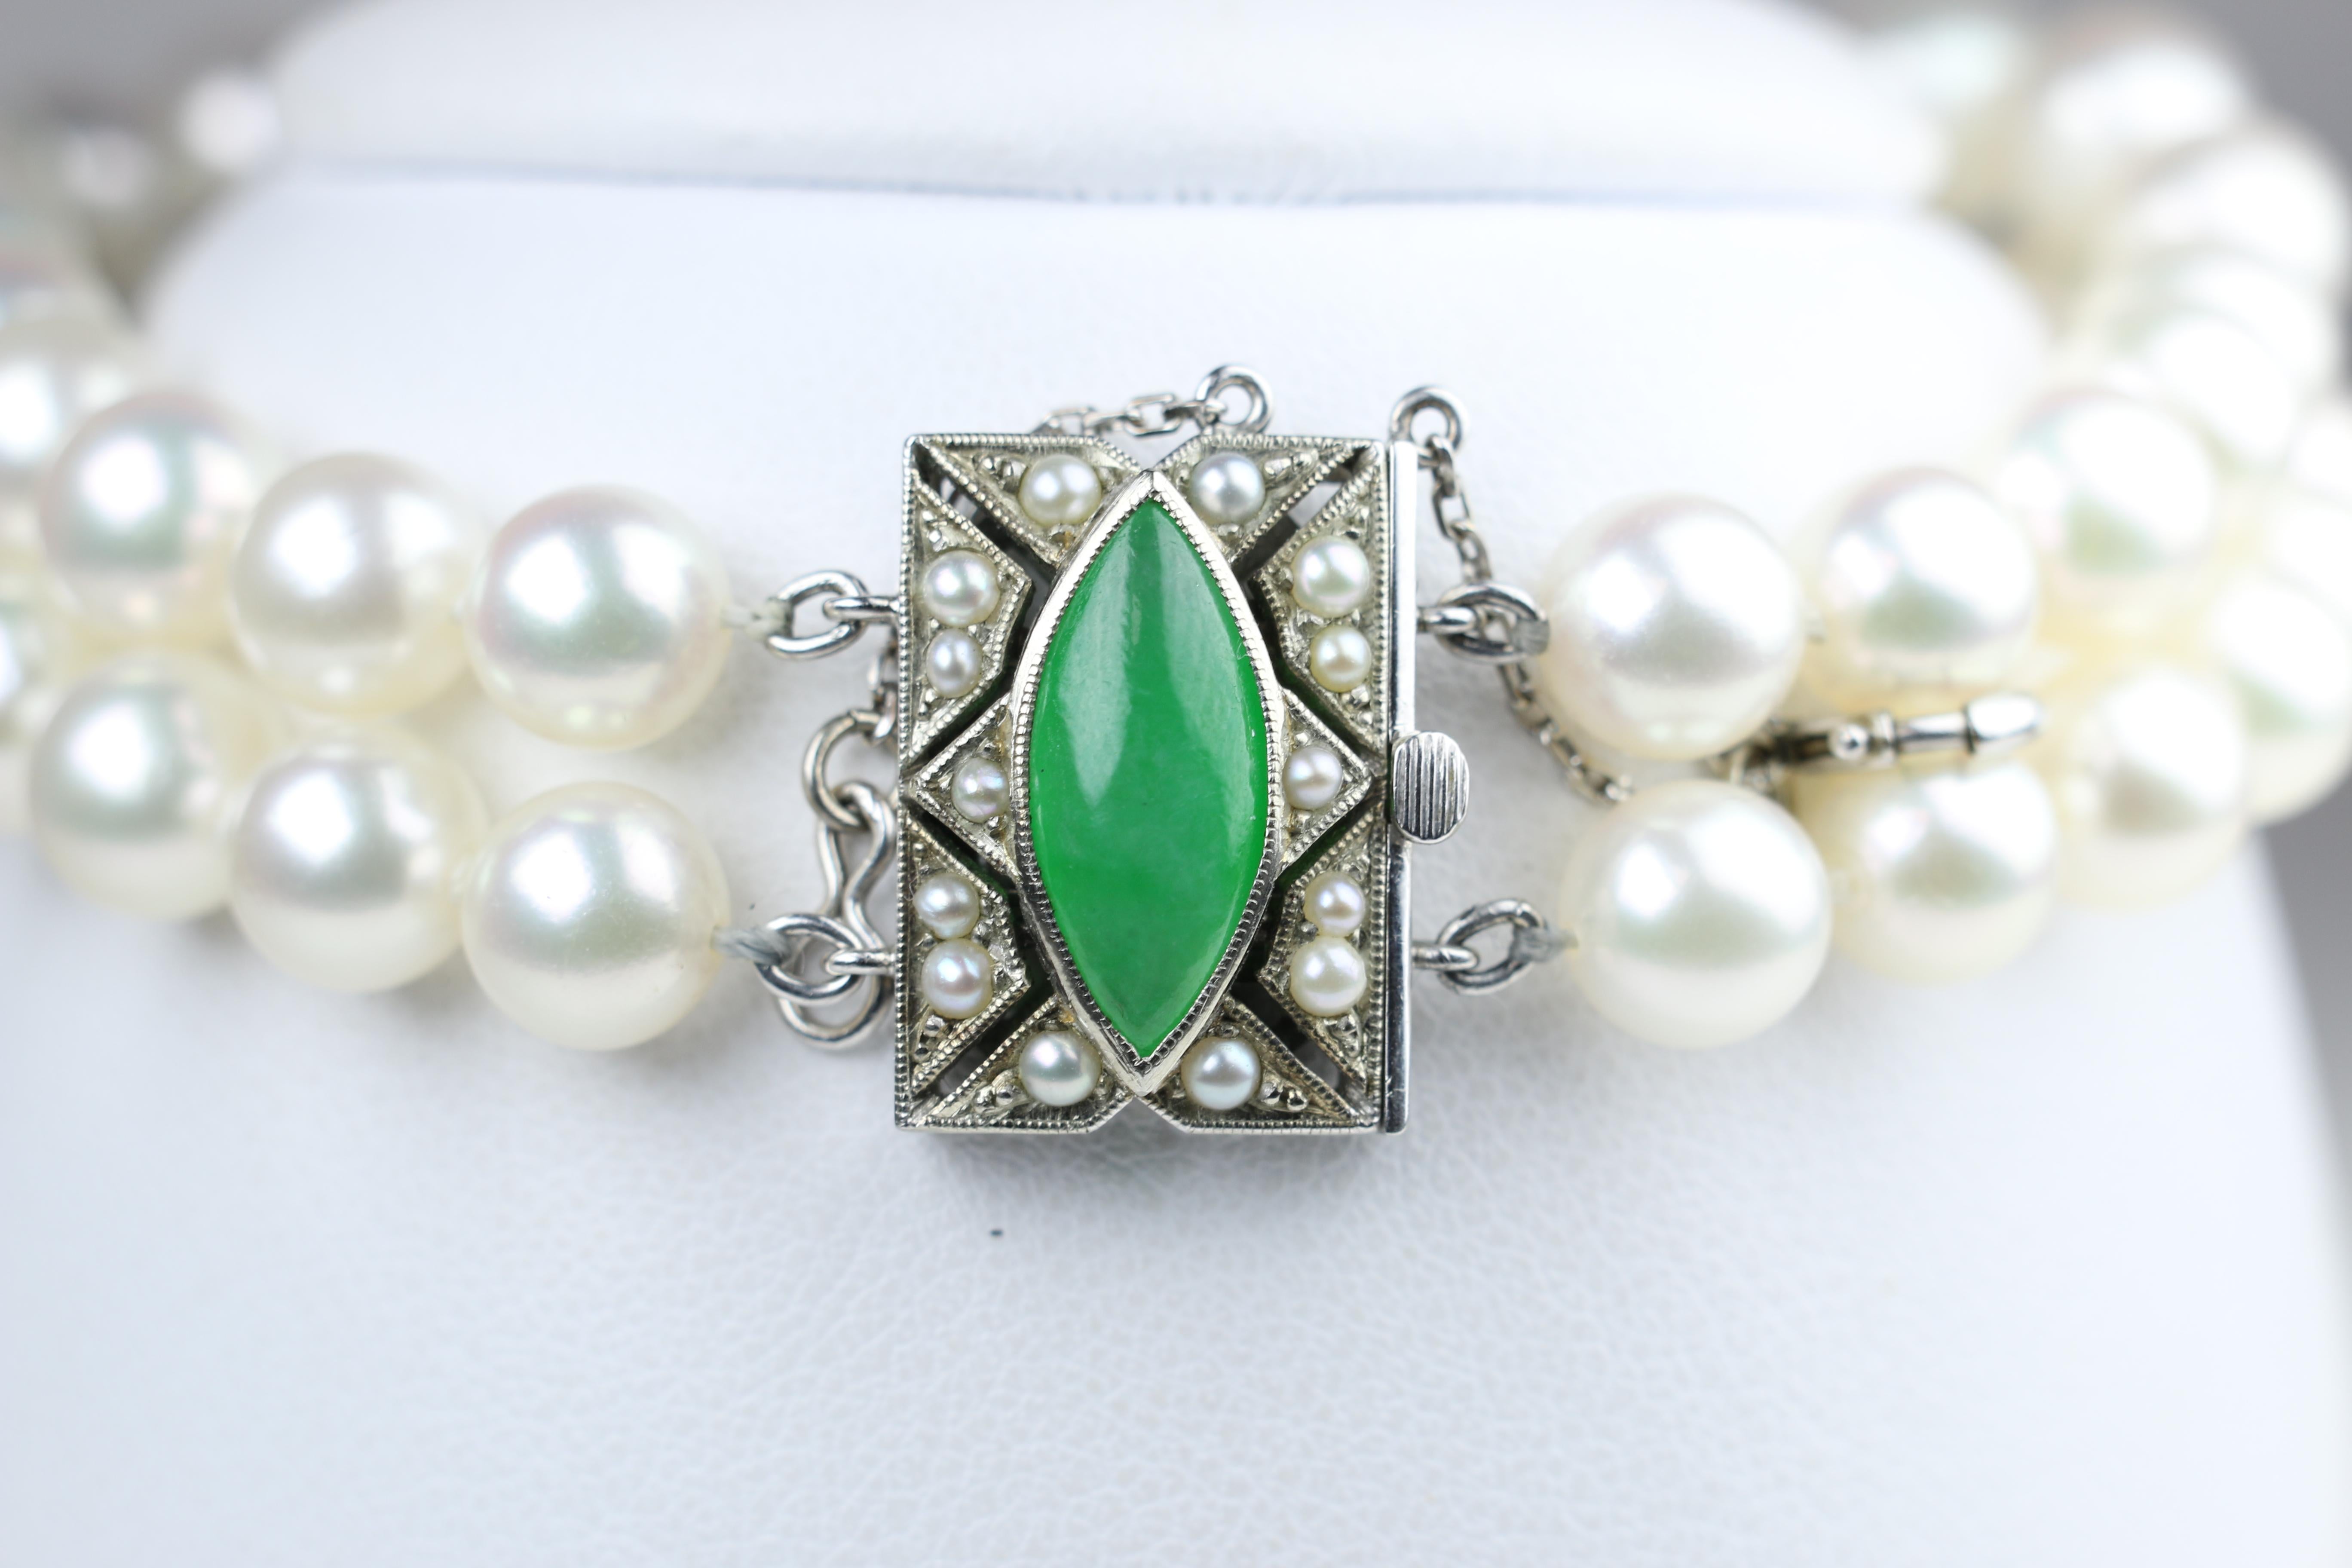 14K White Gold Pearl Jade White Gold Mikimoto Bracelet
Clasp is Deco in look with a beautiful piece of oval jade.  
Safety Clasp 
Stamped White Gold M K14
